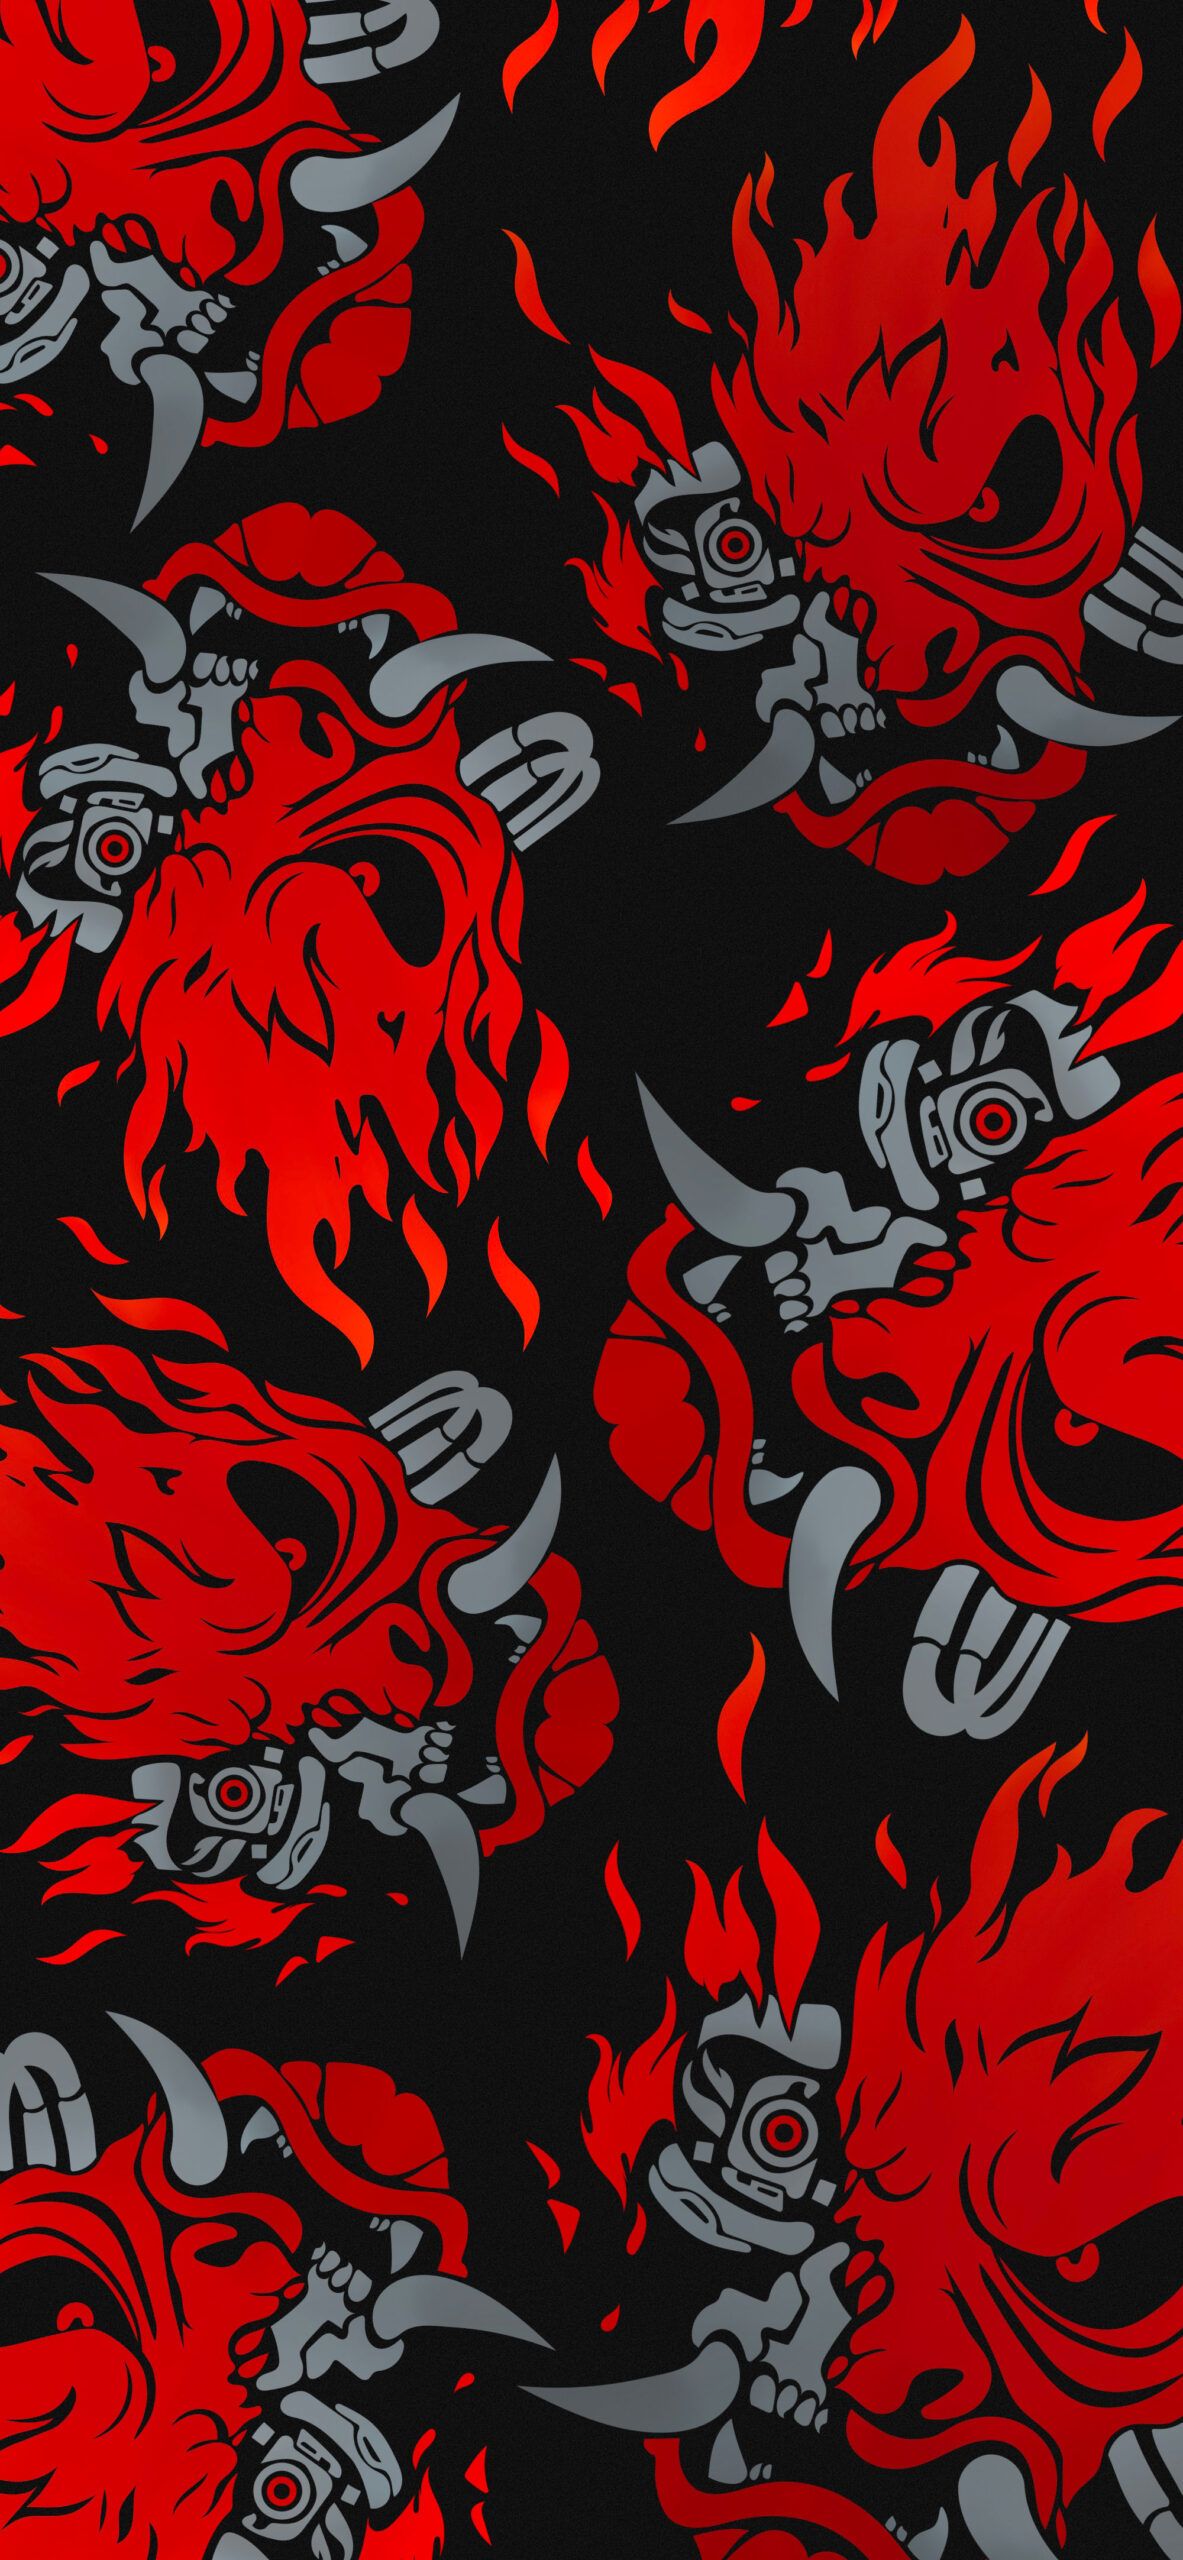 A pattern of red and black flames - Samurai